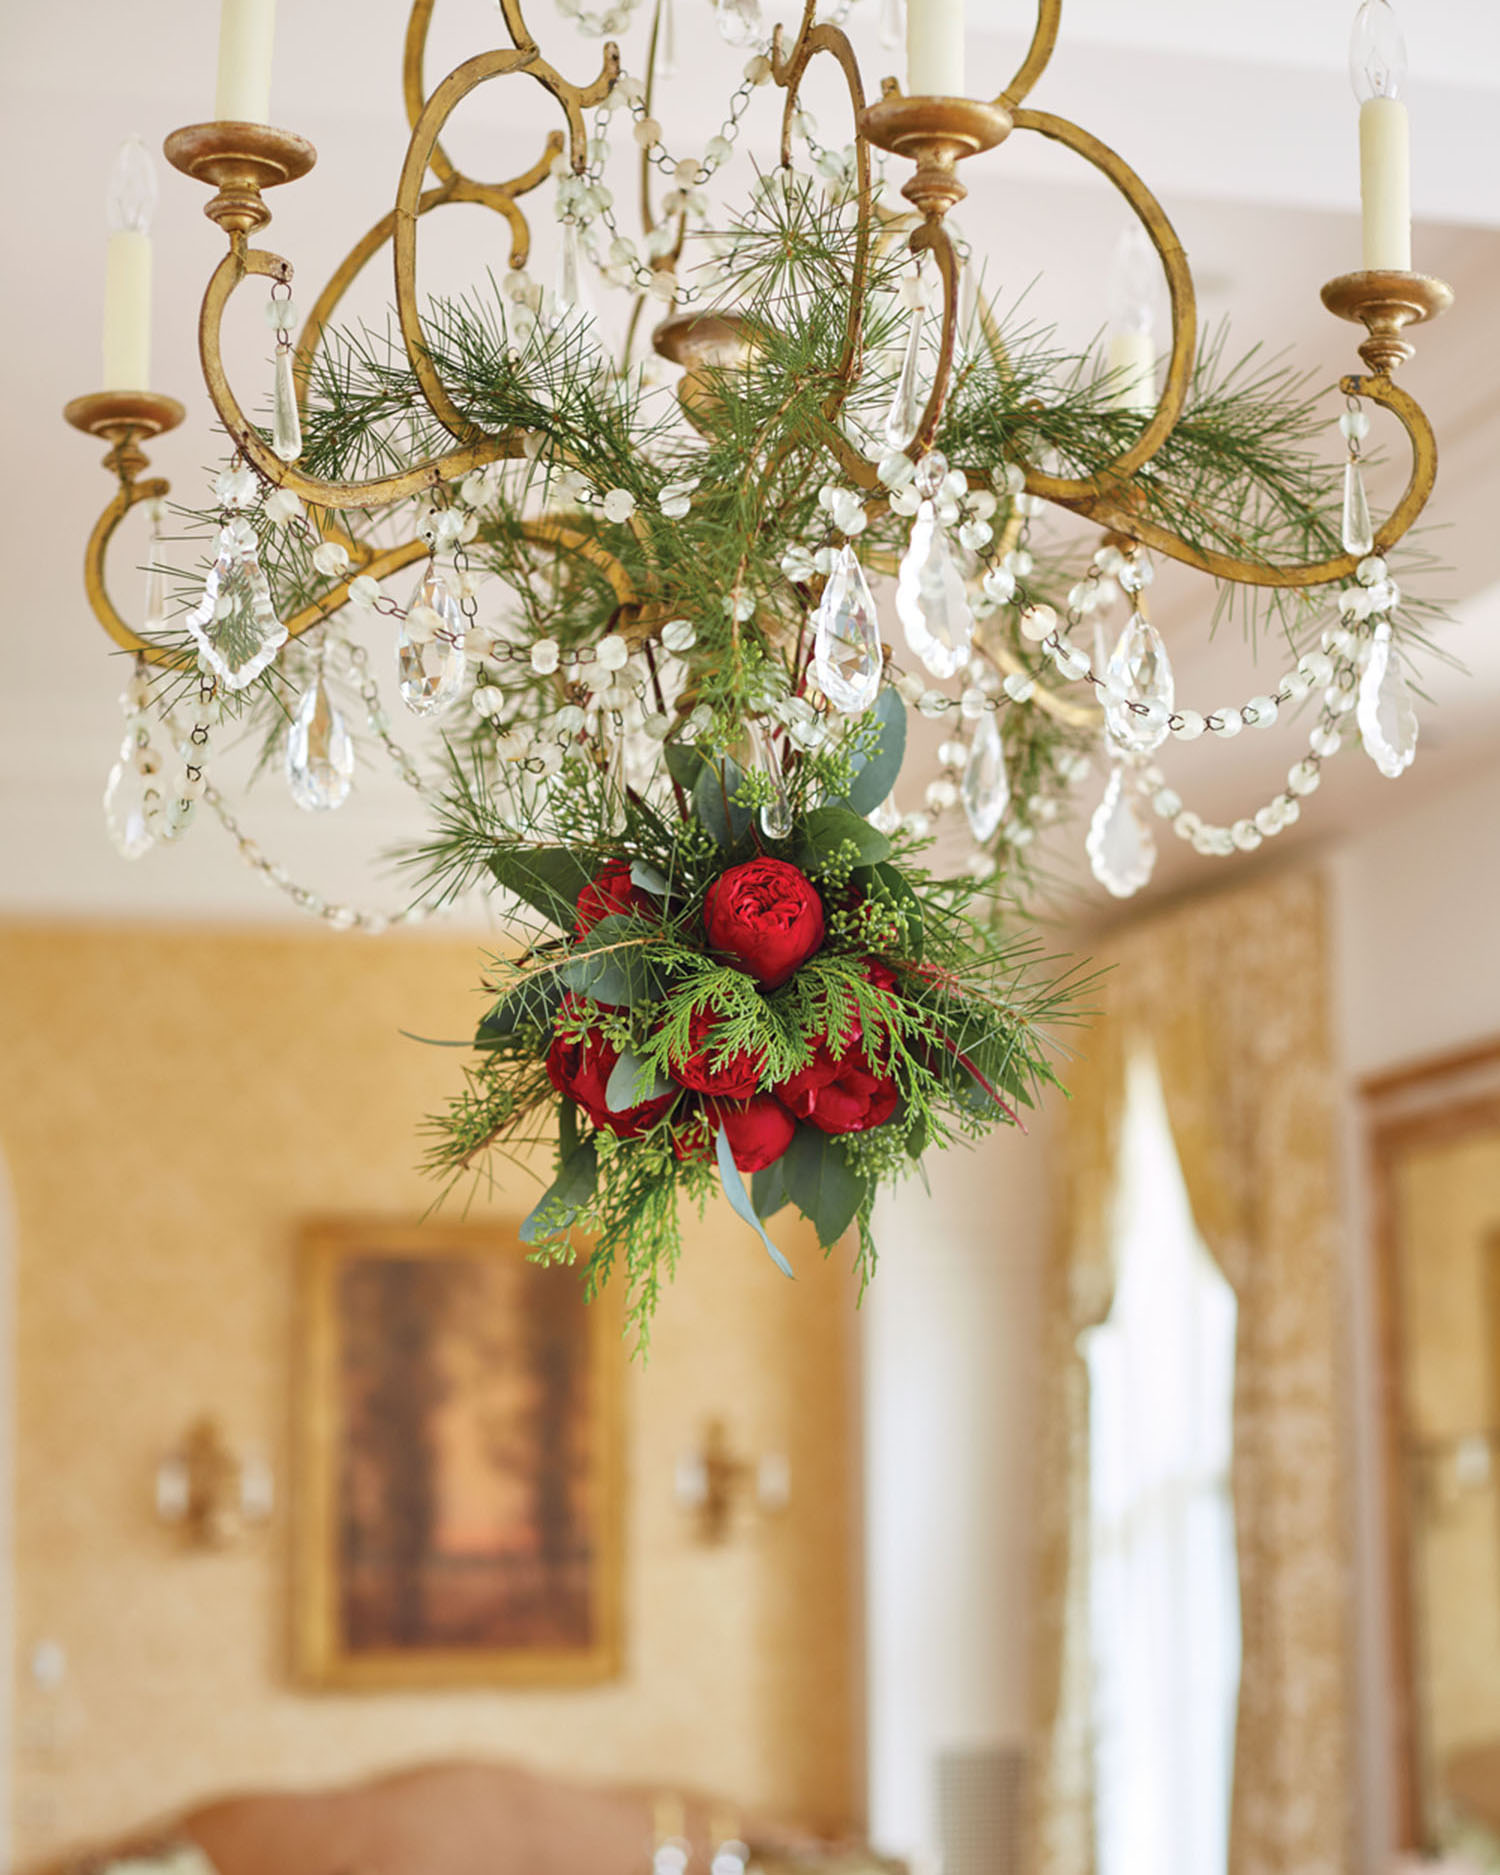 crystal chandelier decorated with evergreen branches and red flowers